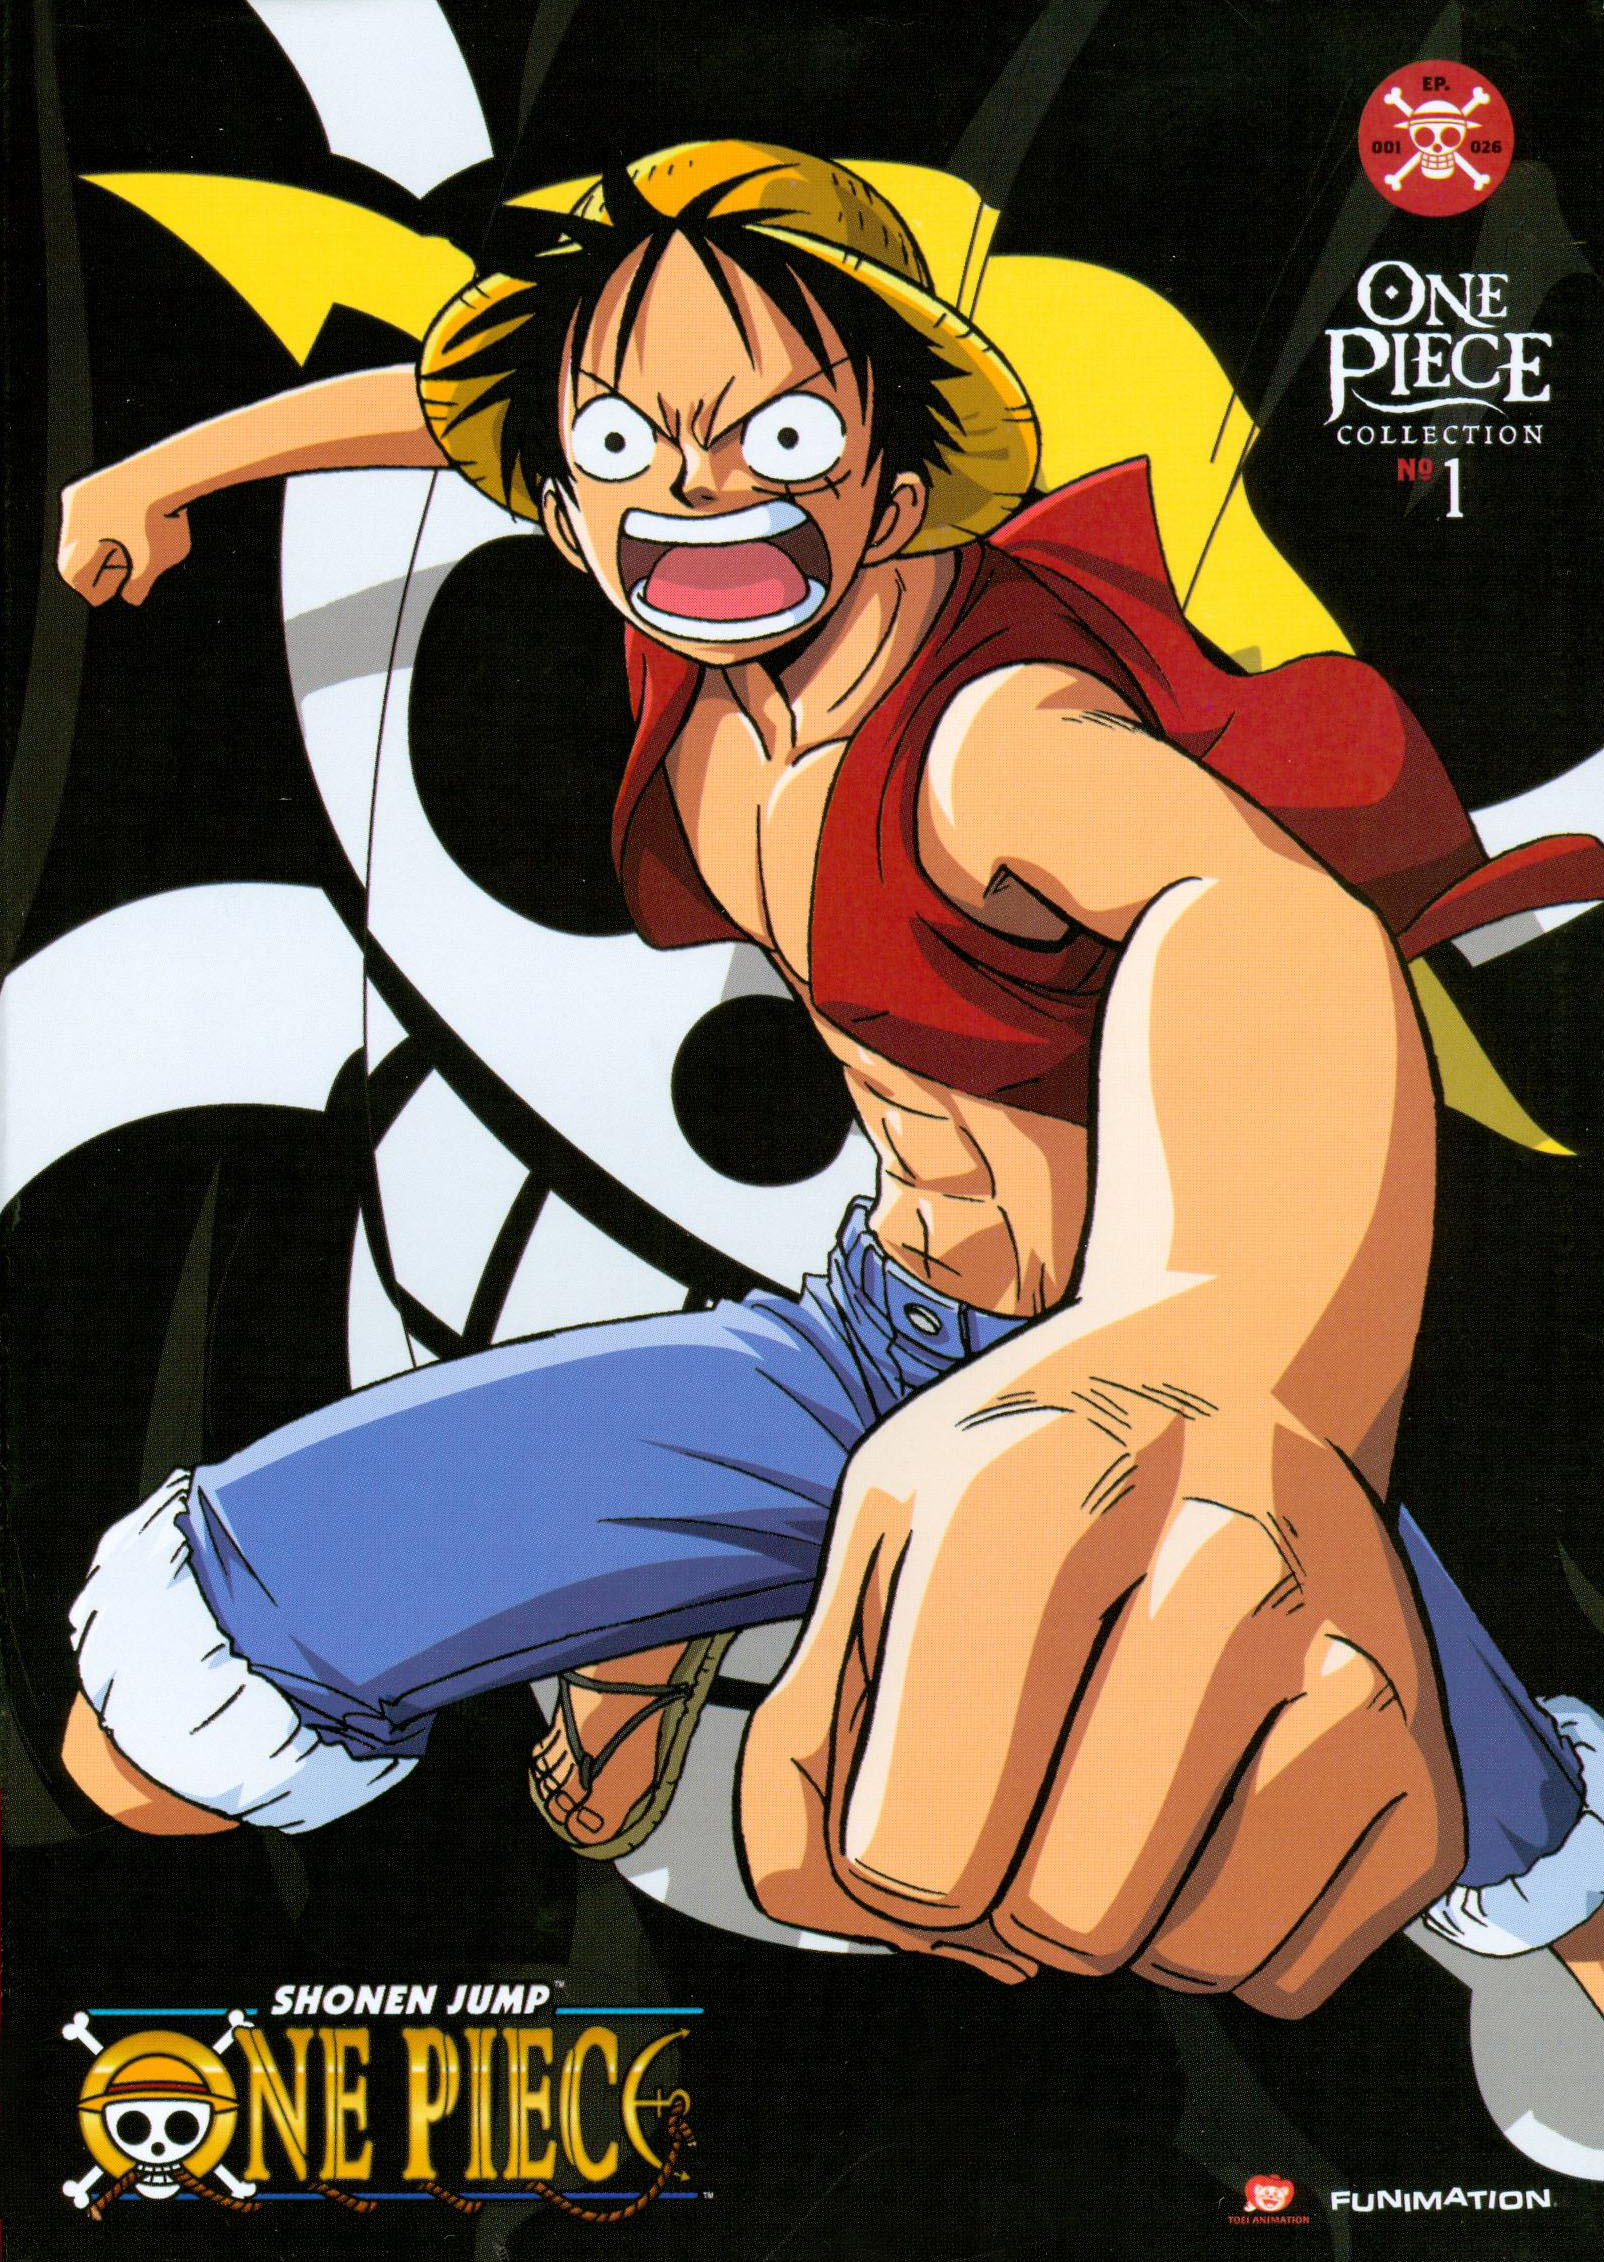 One Piece: Collection 1 [4 Discs] [DVD] - Best Buy